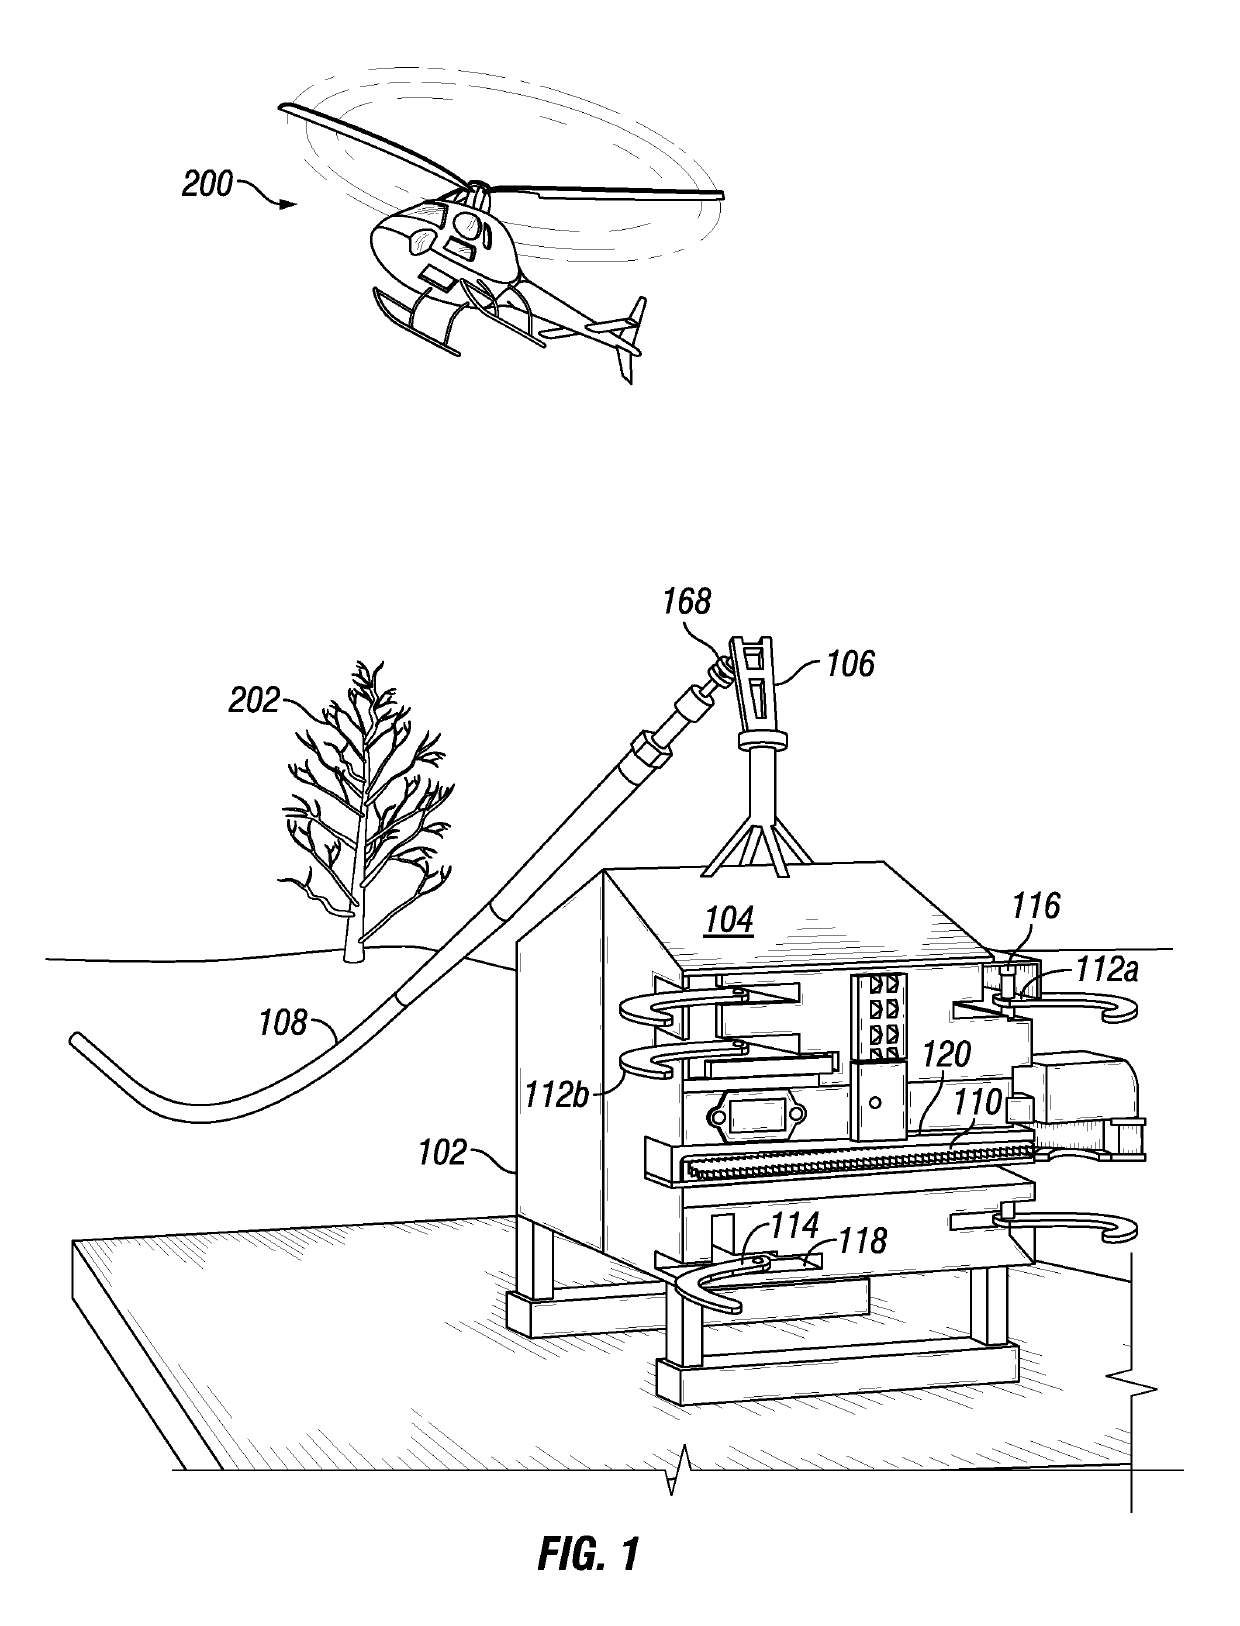 Airborne vegetation cutting assembly